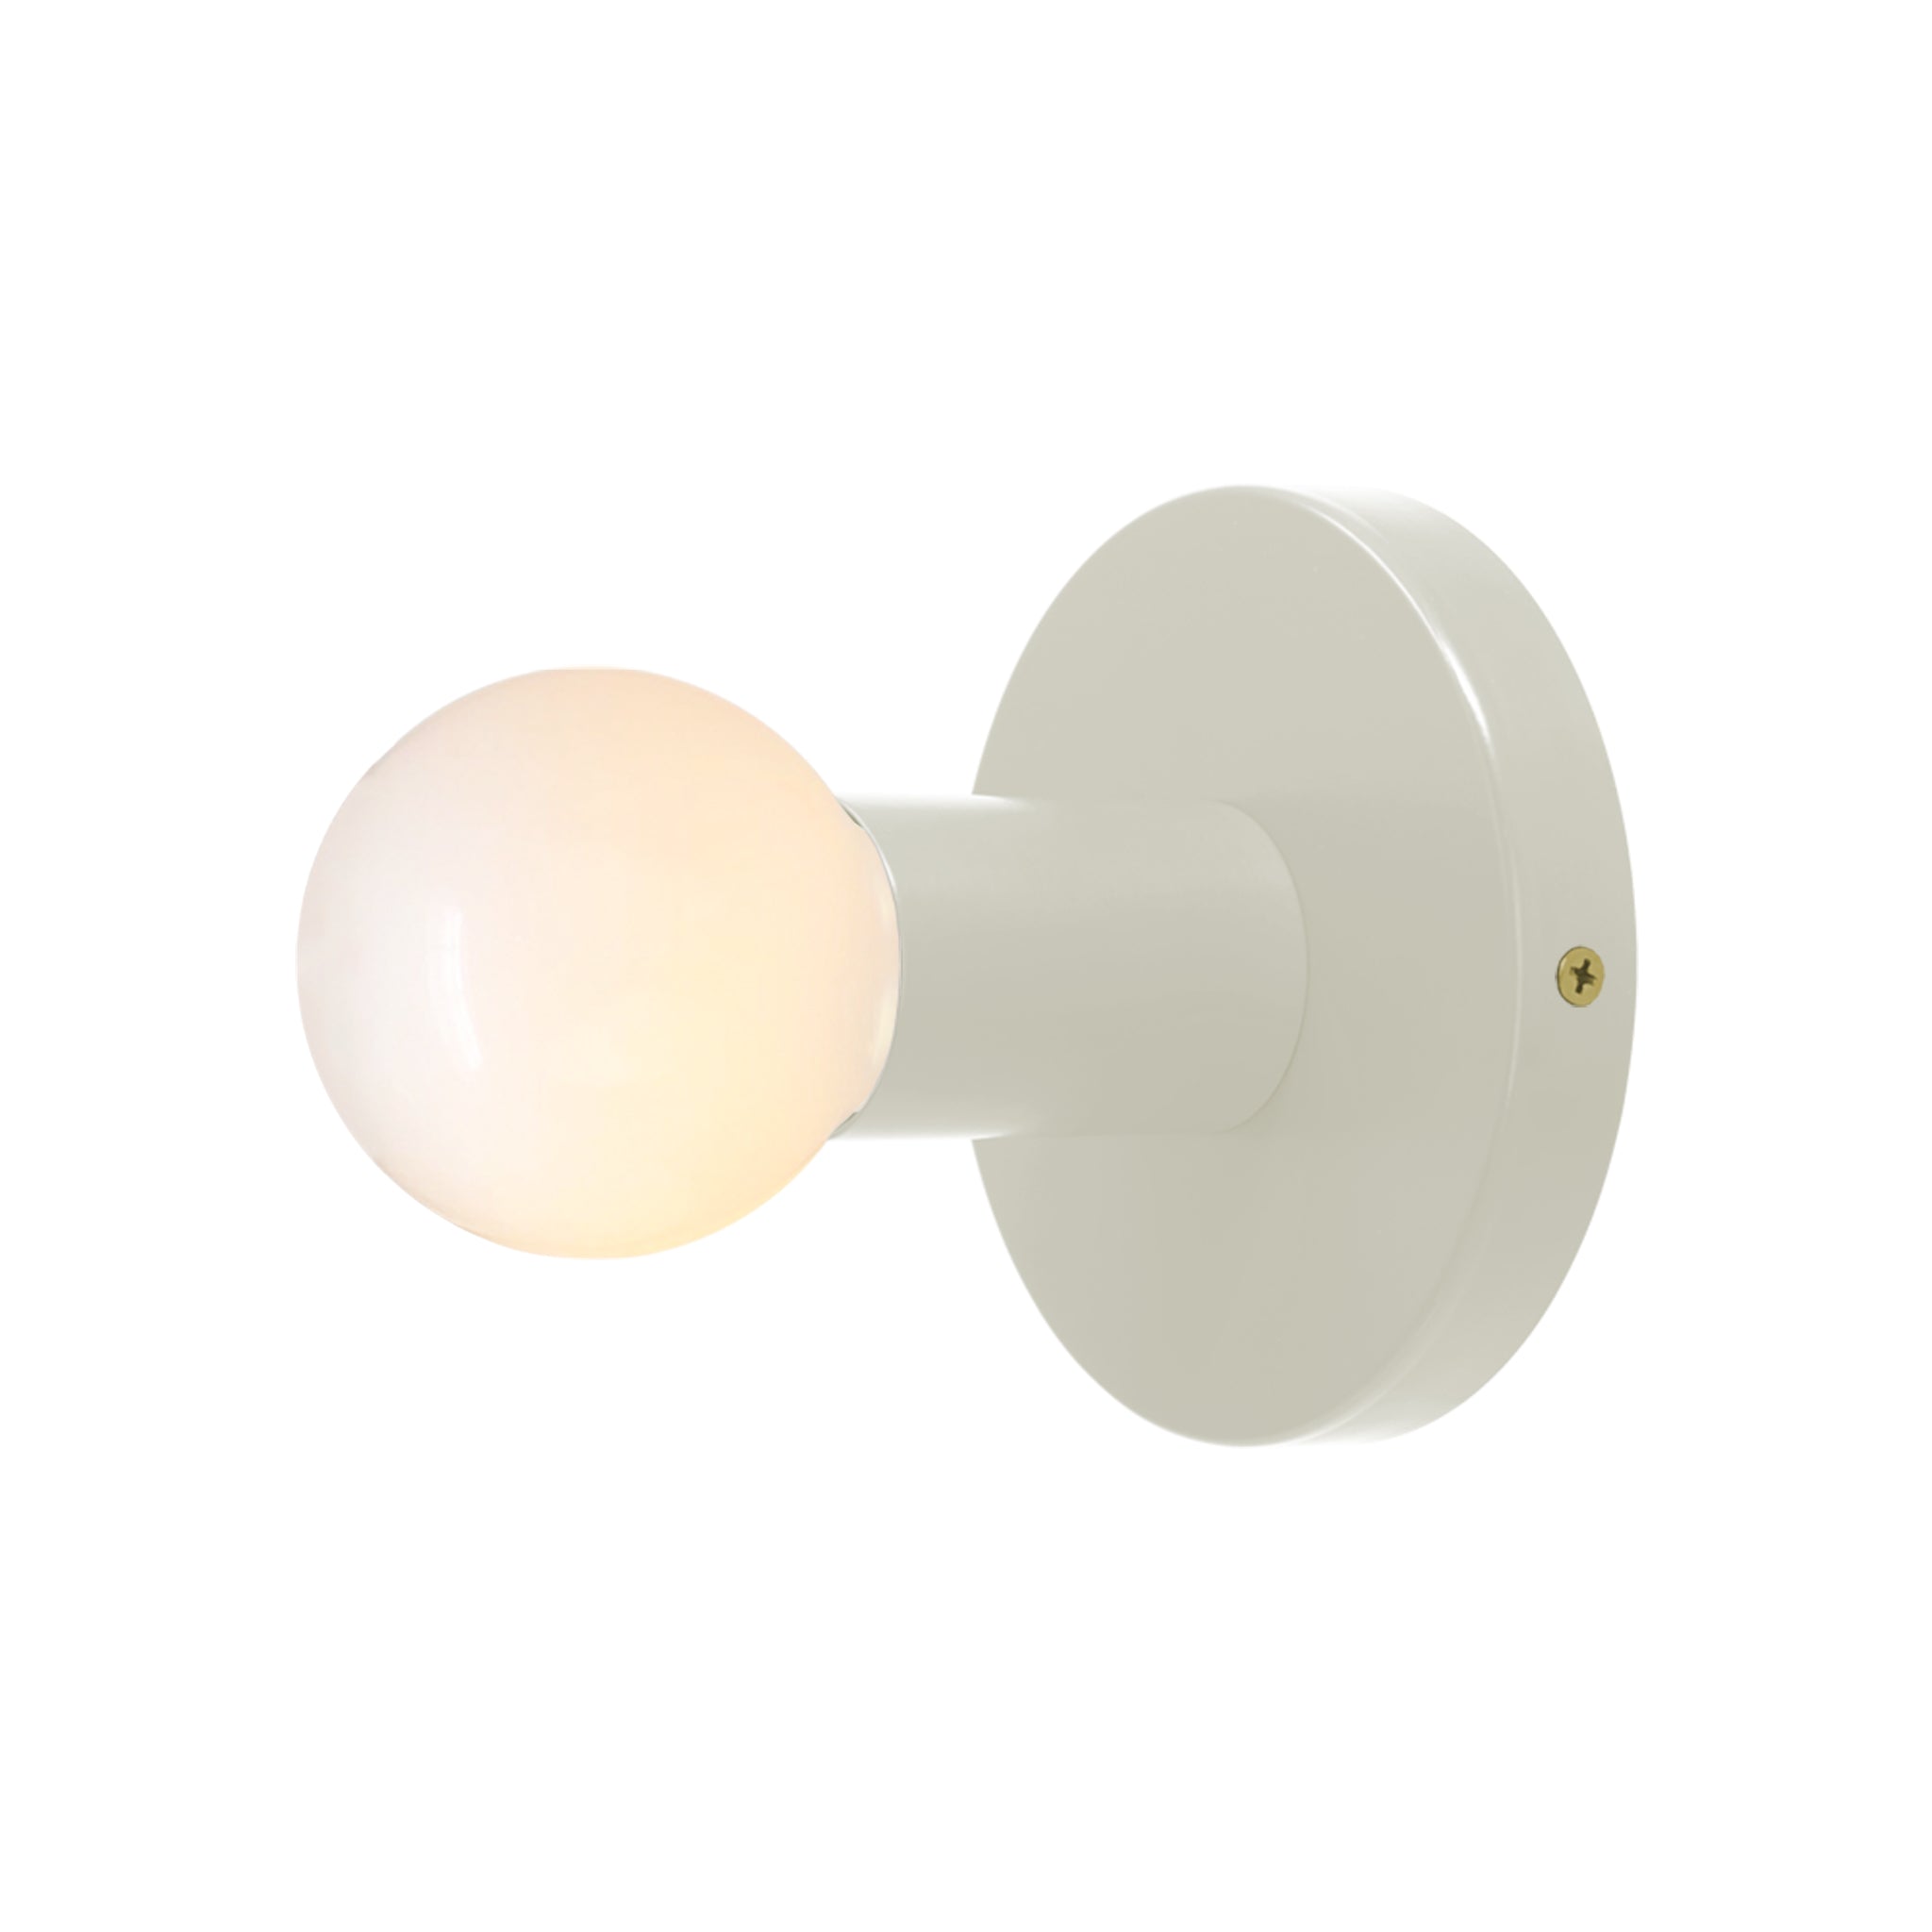 Brass and bone color Twink sconce Dutton Brown lighting